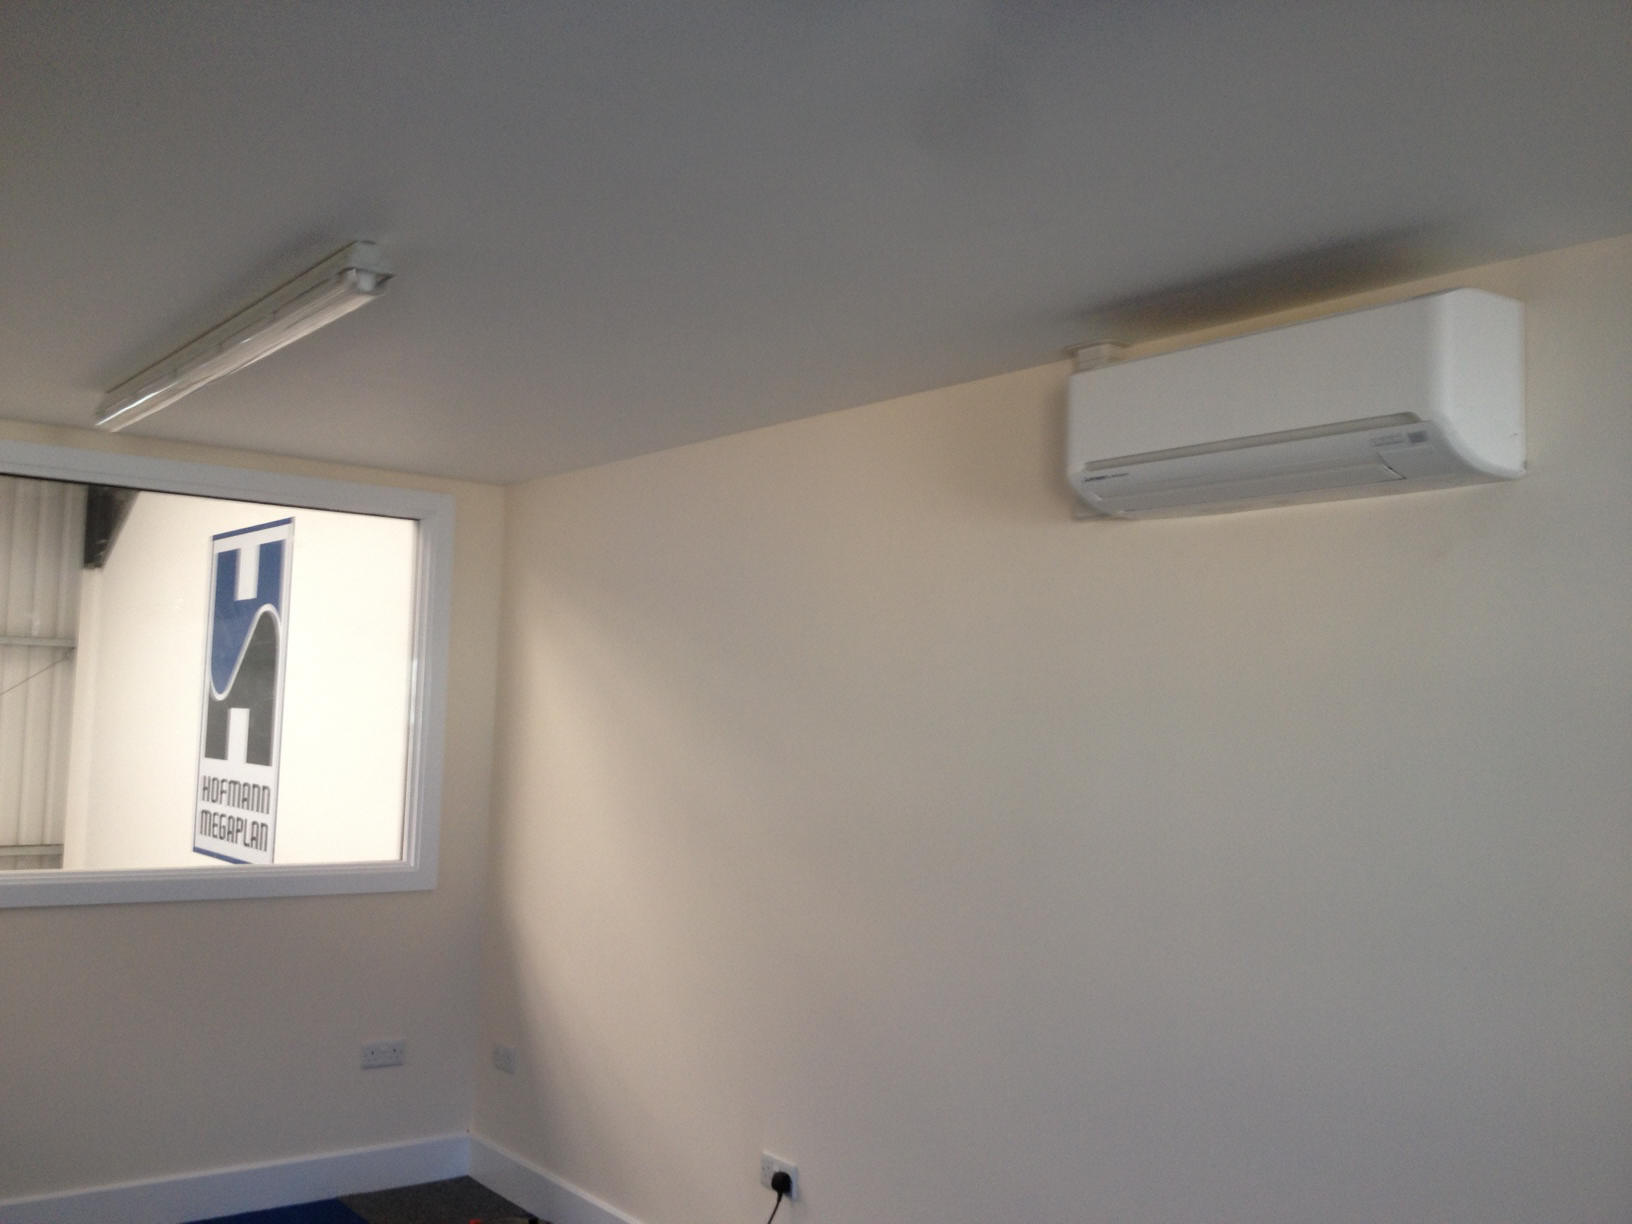 The bonus about air conditioning heat pumps for small business is when you relocate